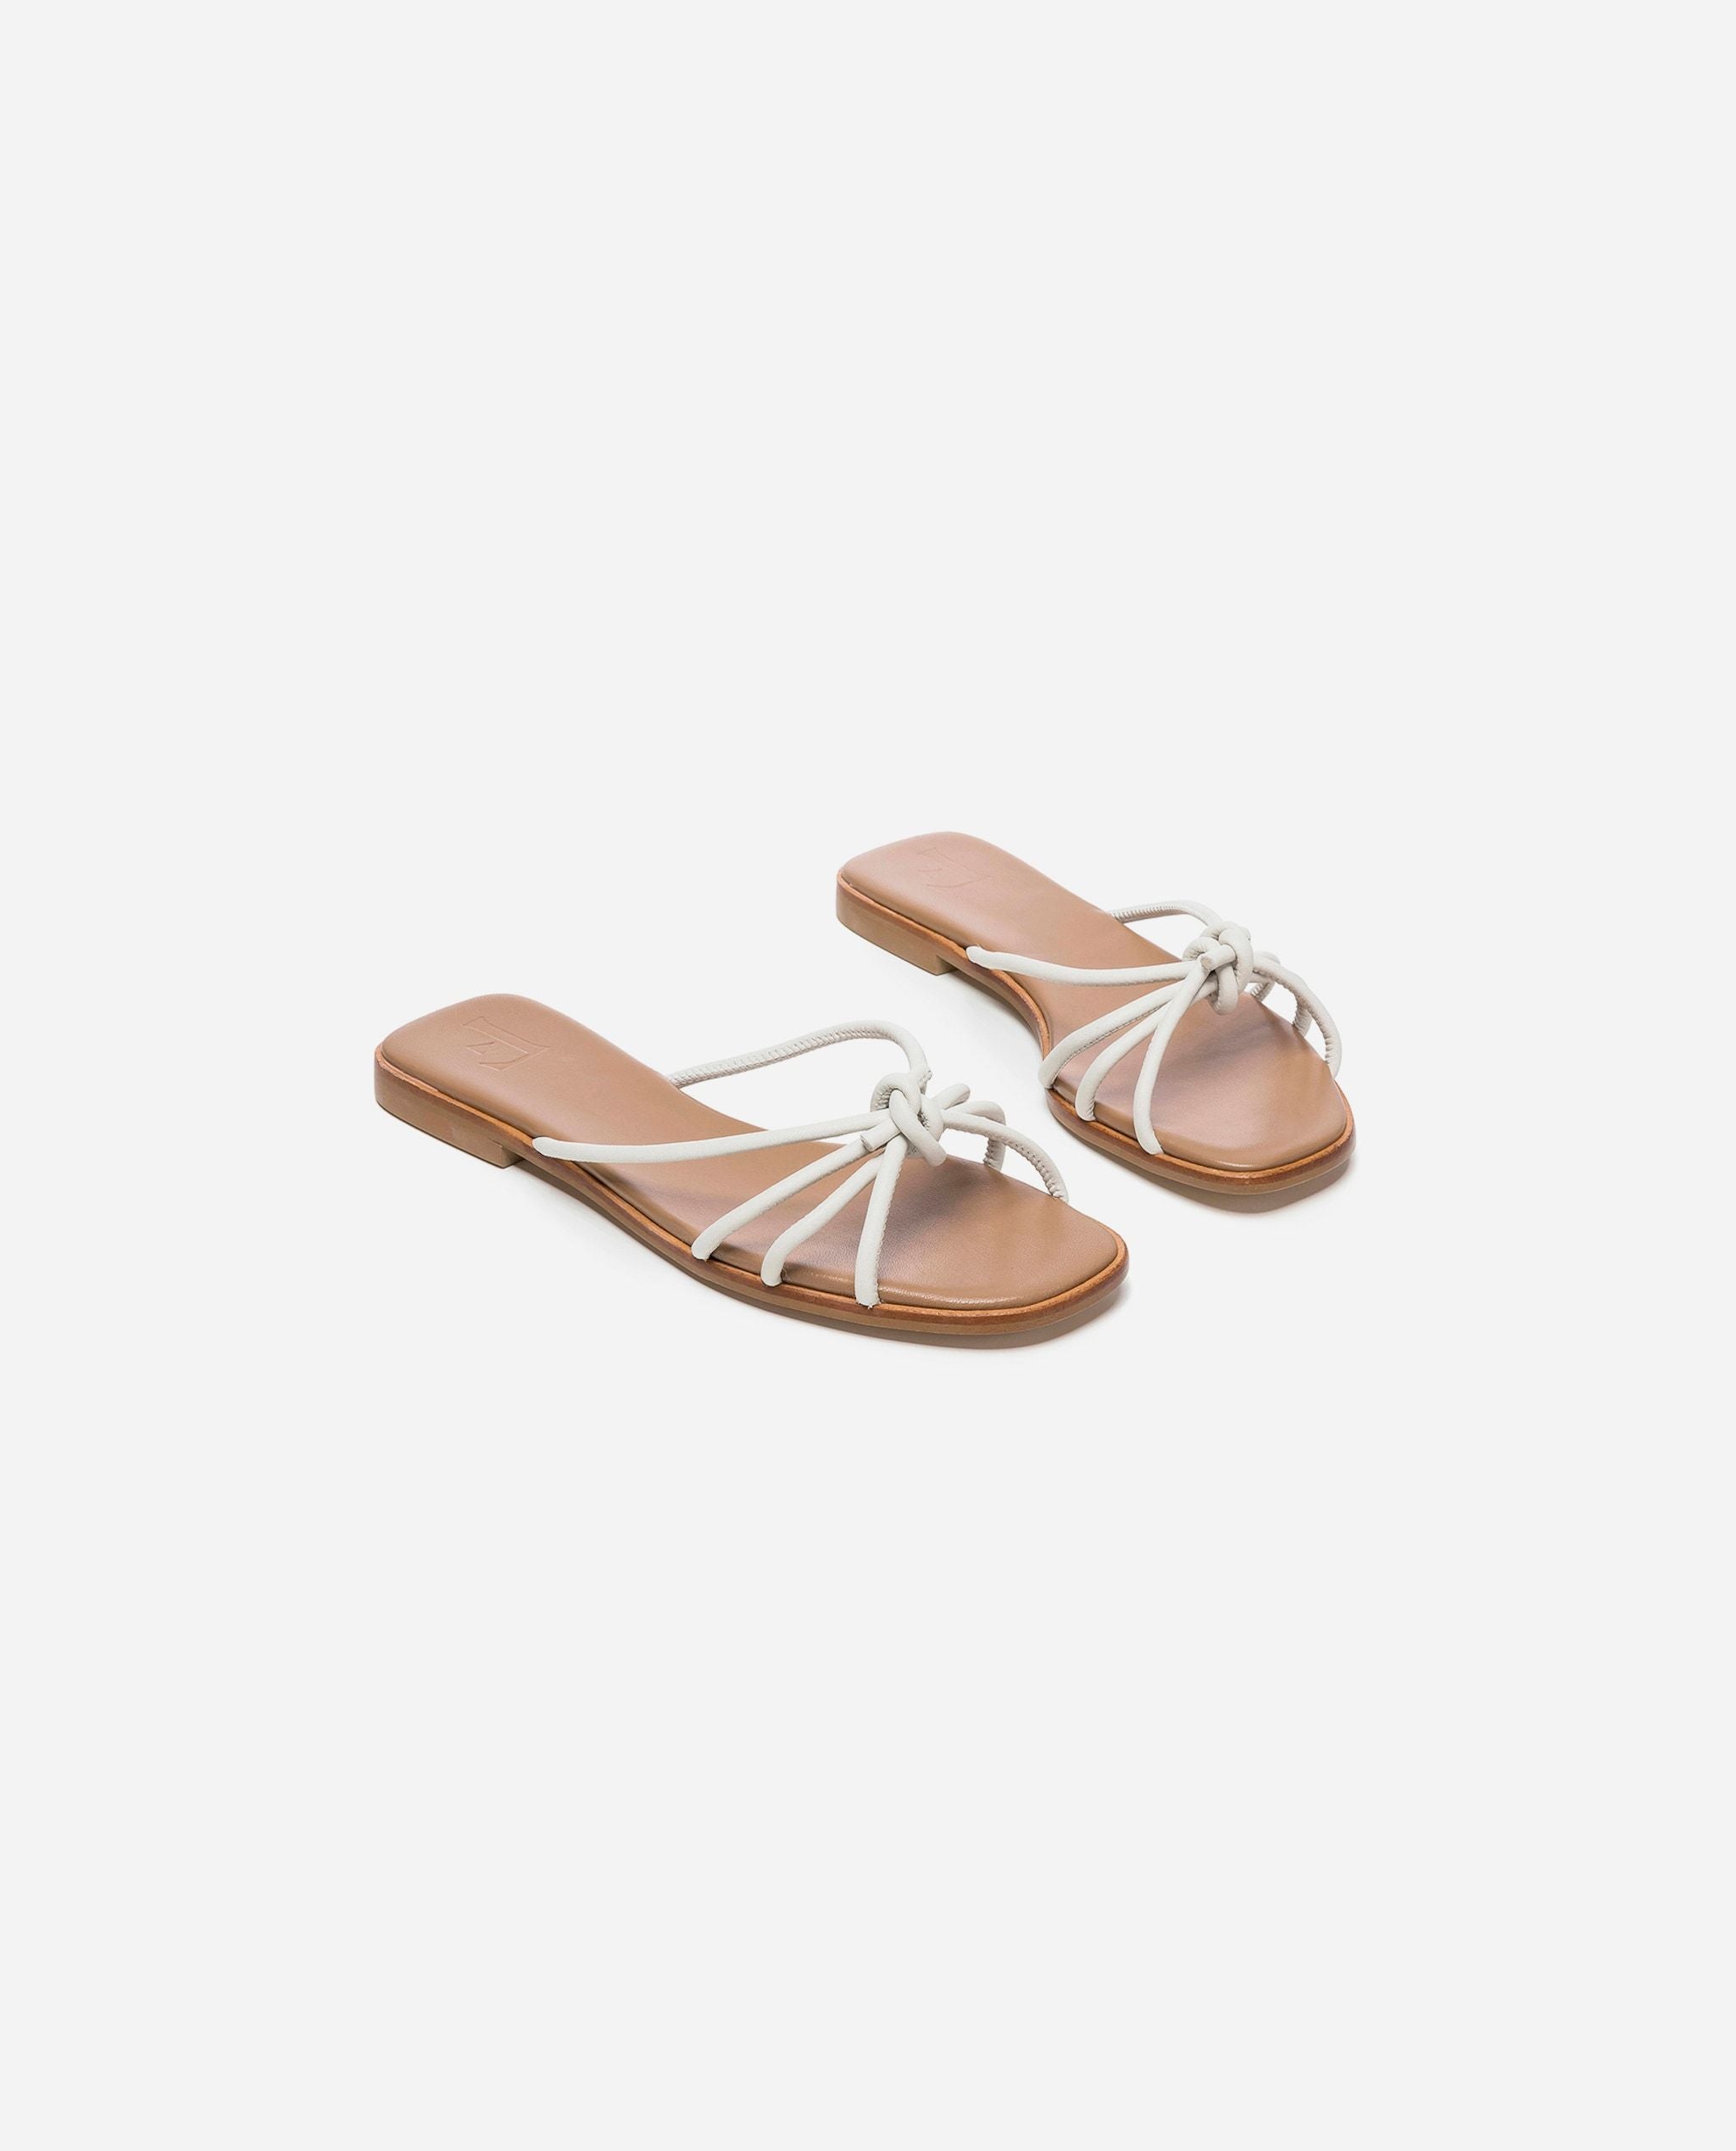 Yvette Leather Off White Flat Sandals Flats 19010700801-008 - 3